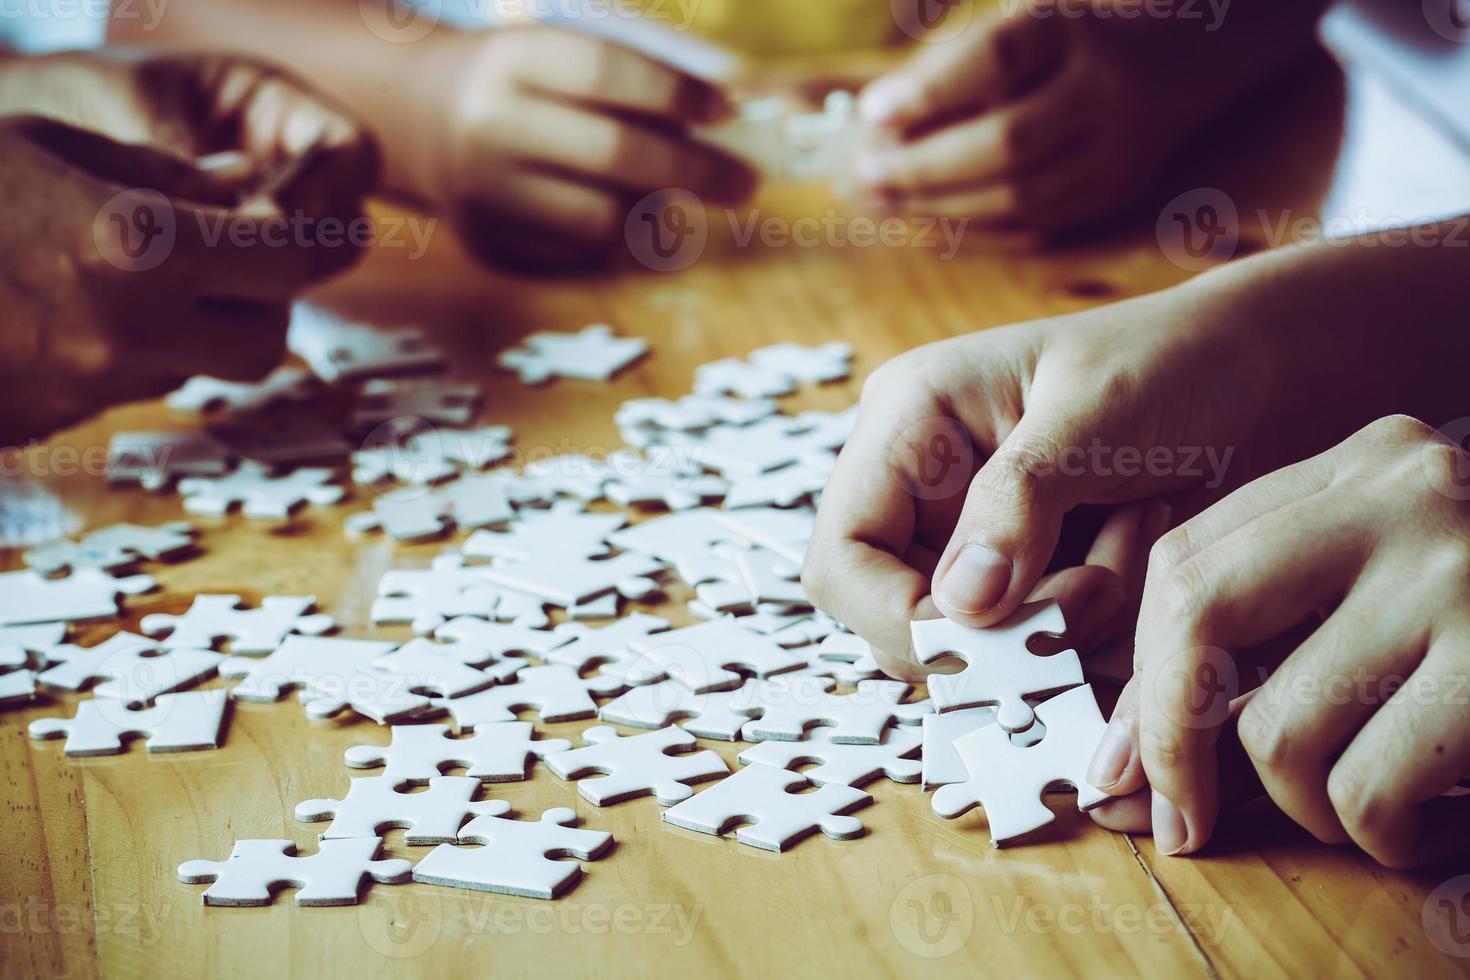 Hands of a person little child and parent playing jigsaw puzzle piece game together on wooden table at home, concept for leisure with family, play with children's development, education and fun. photo